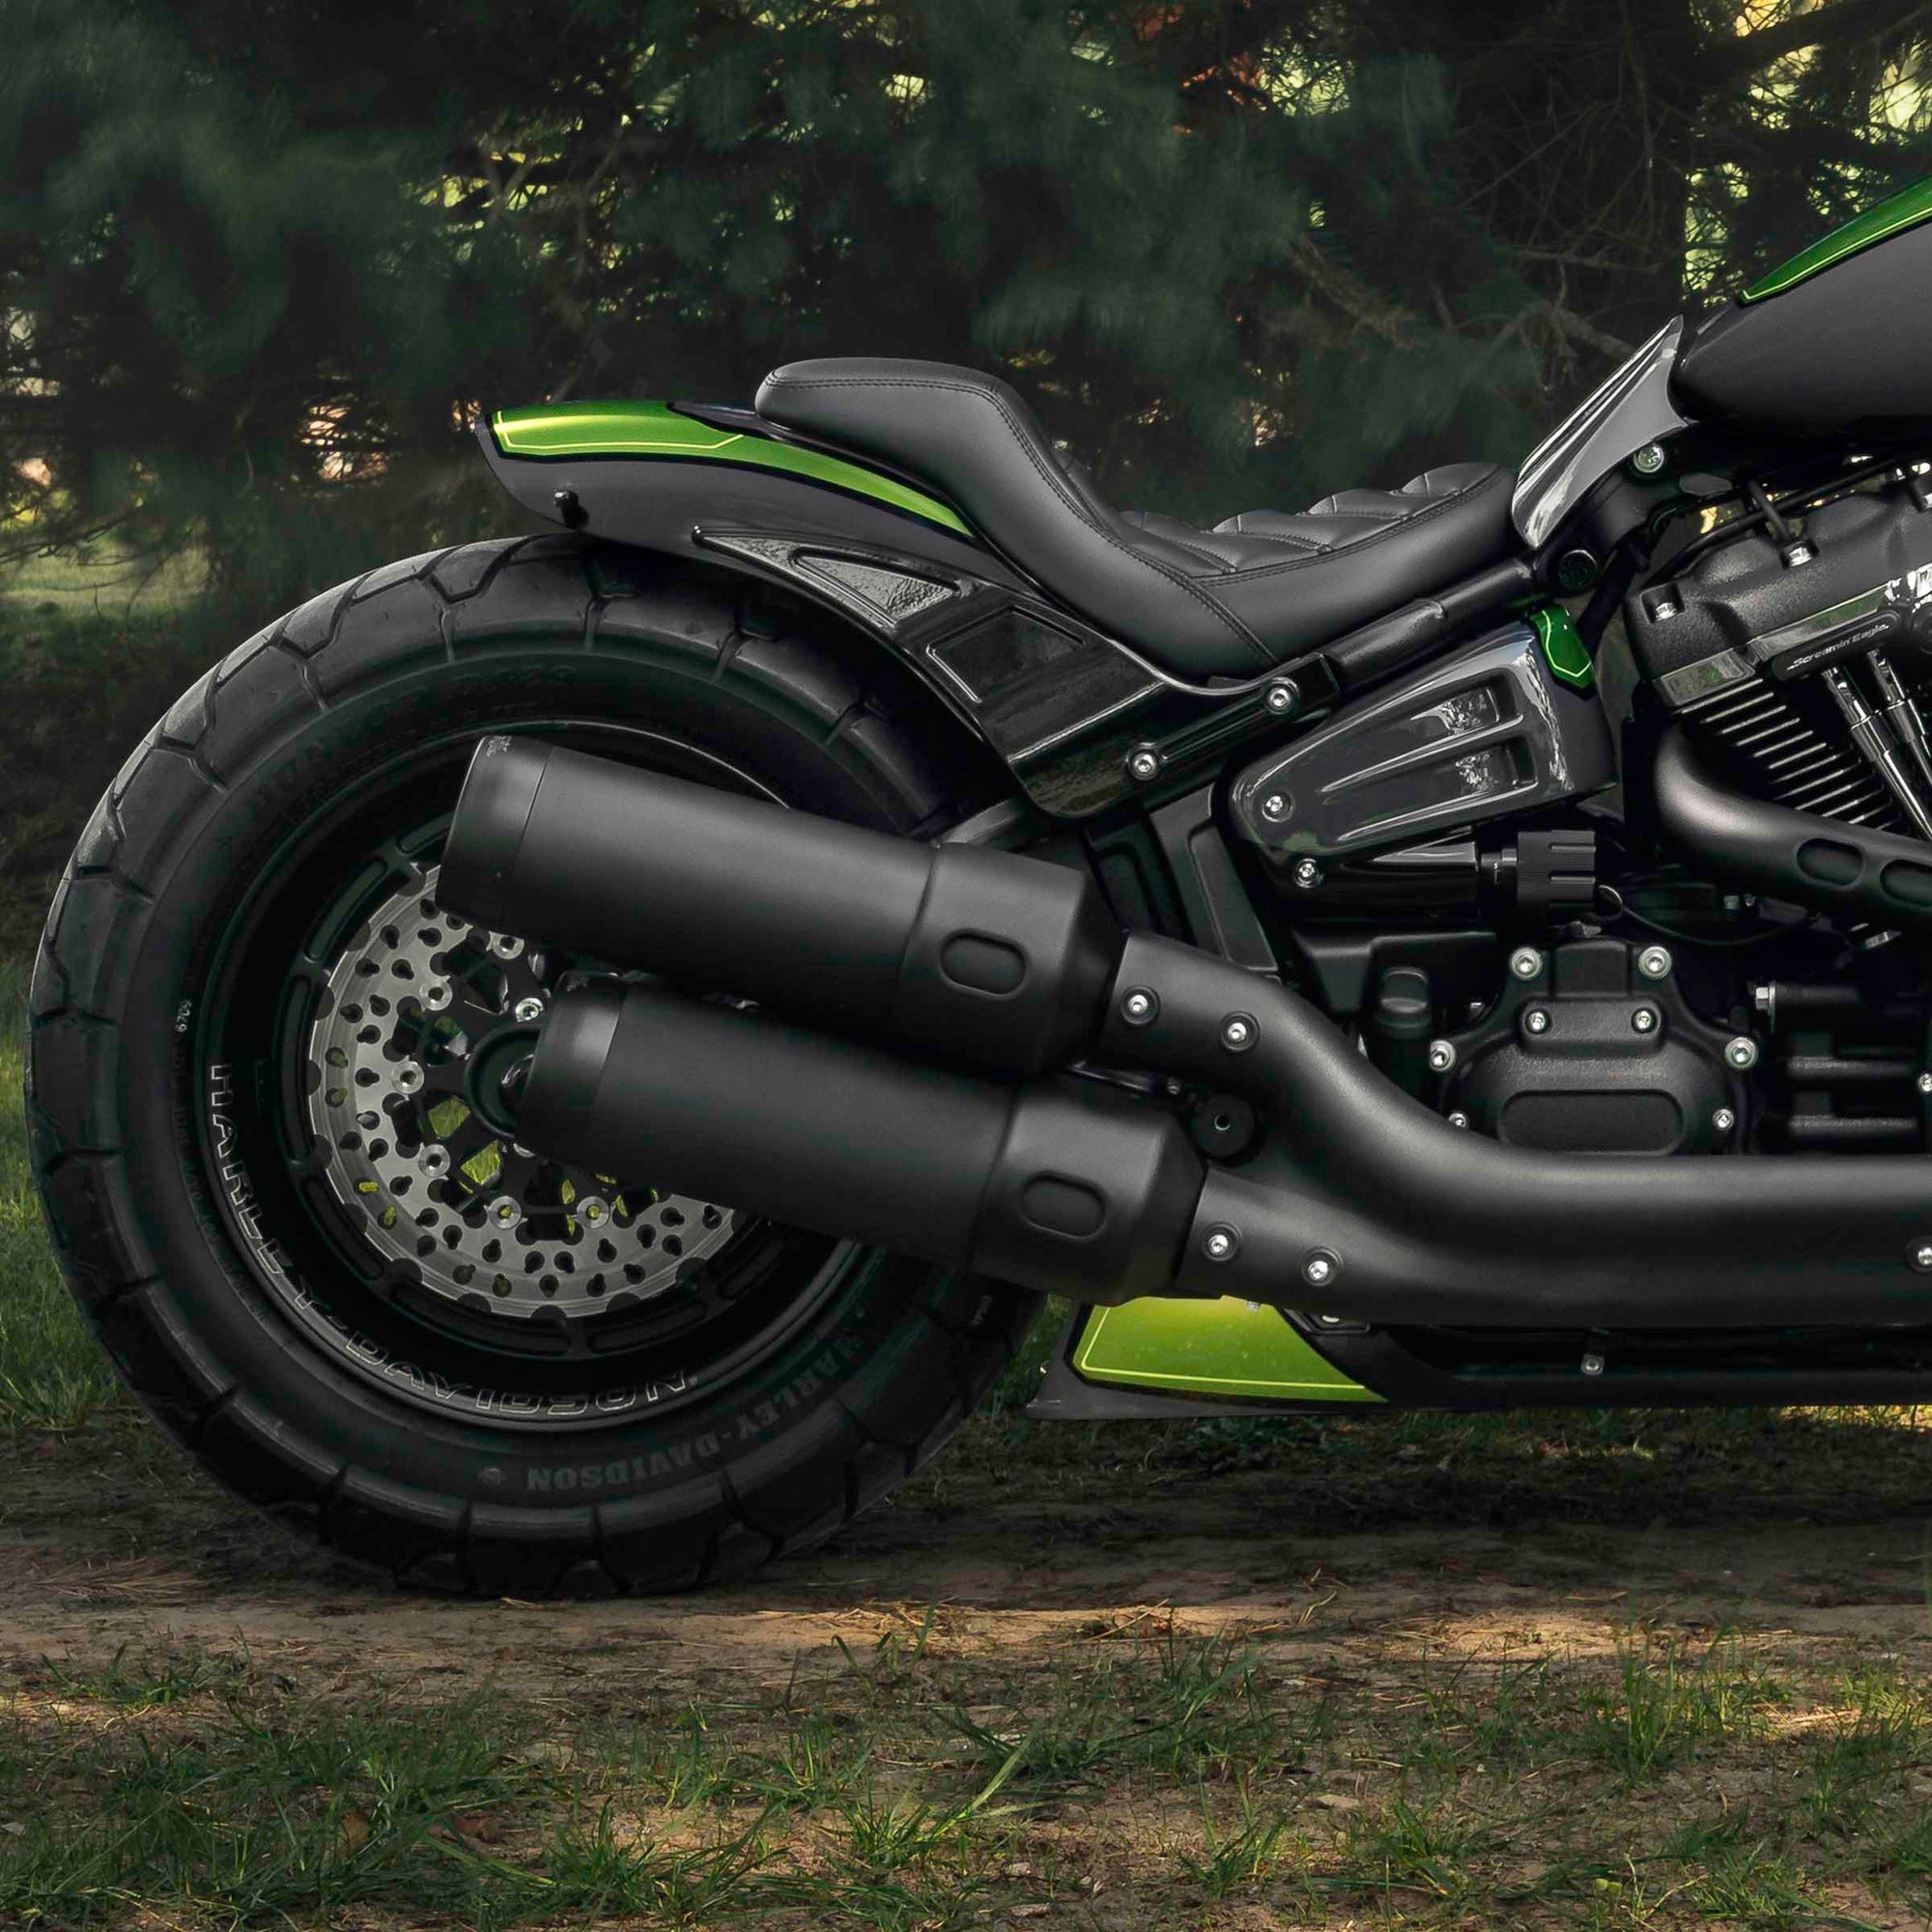 Zoomed  Harley Davidson Fat Bob motorcycle with Killer Custom parts from the side with some trees in the background